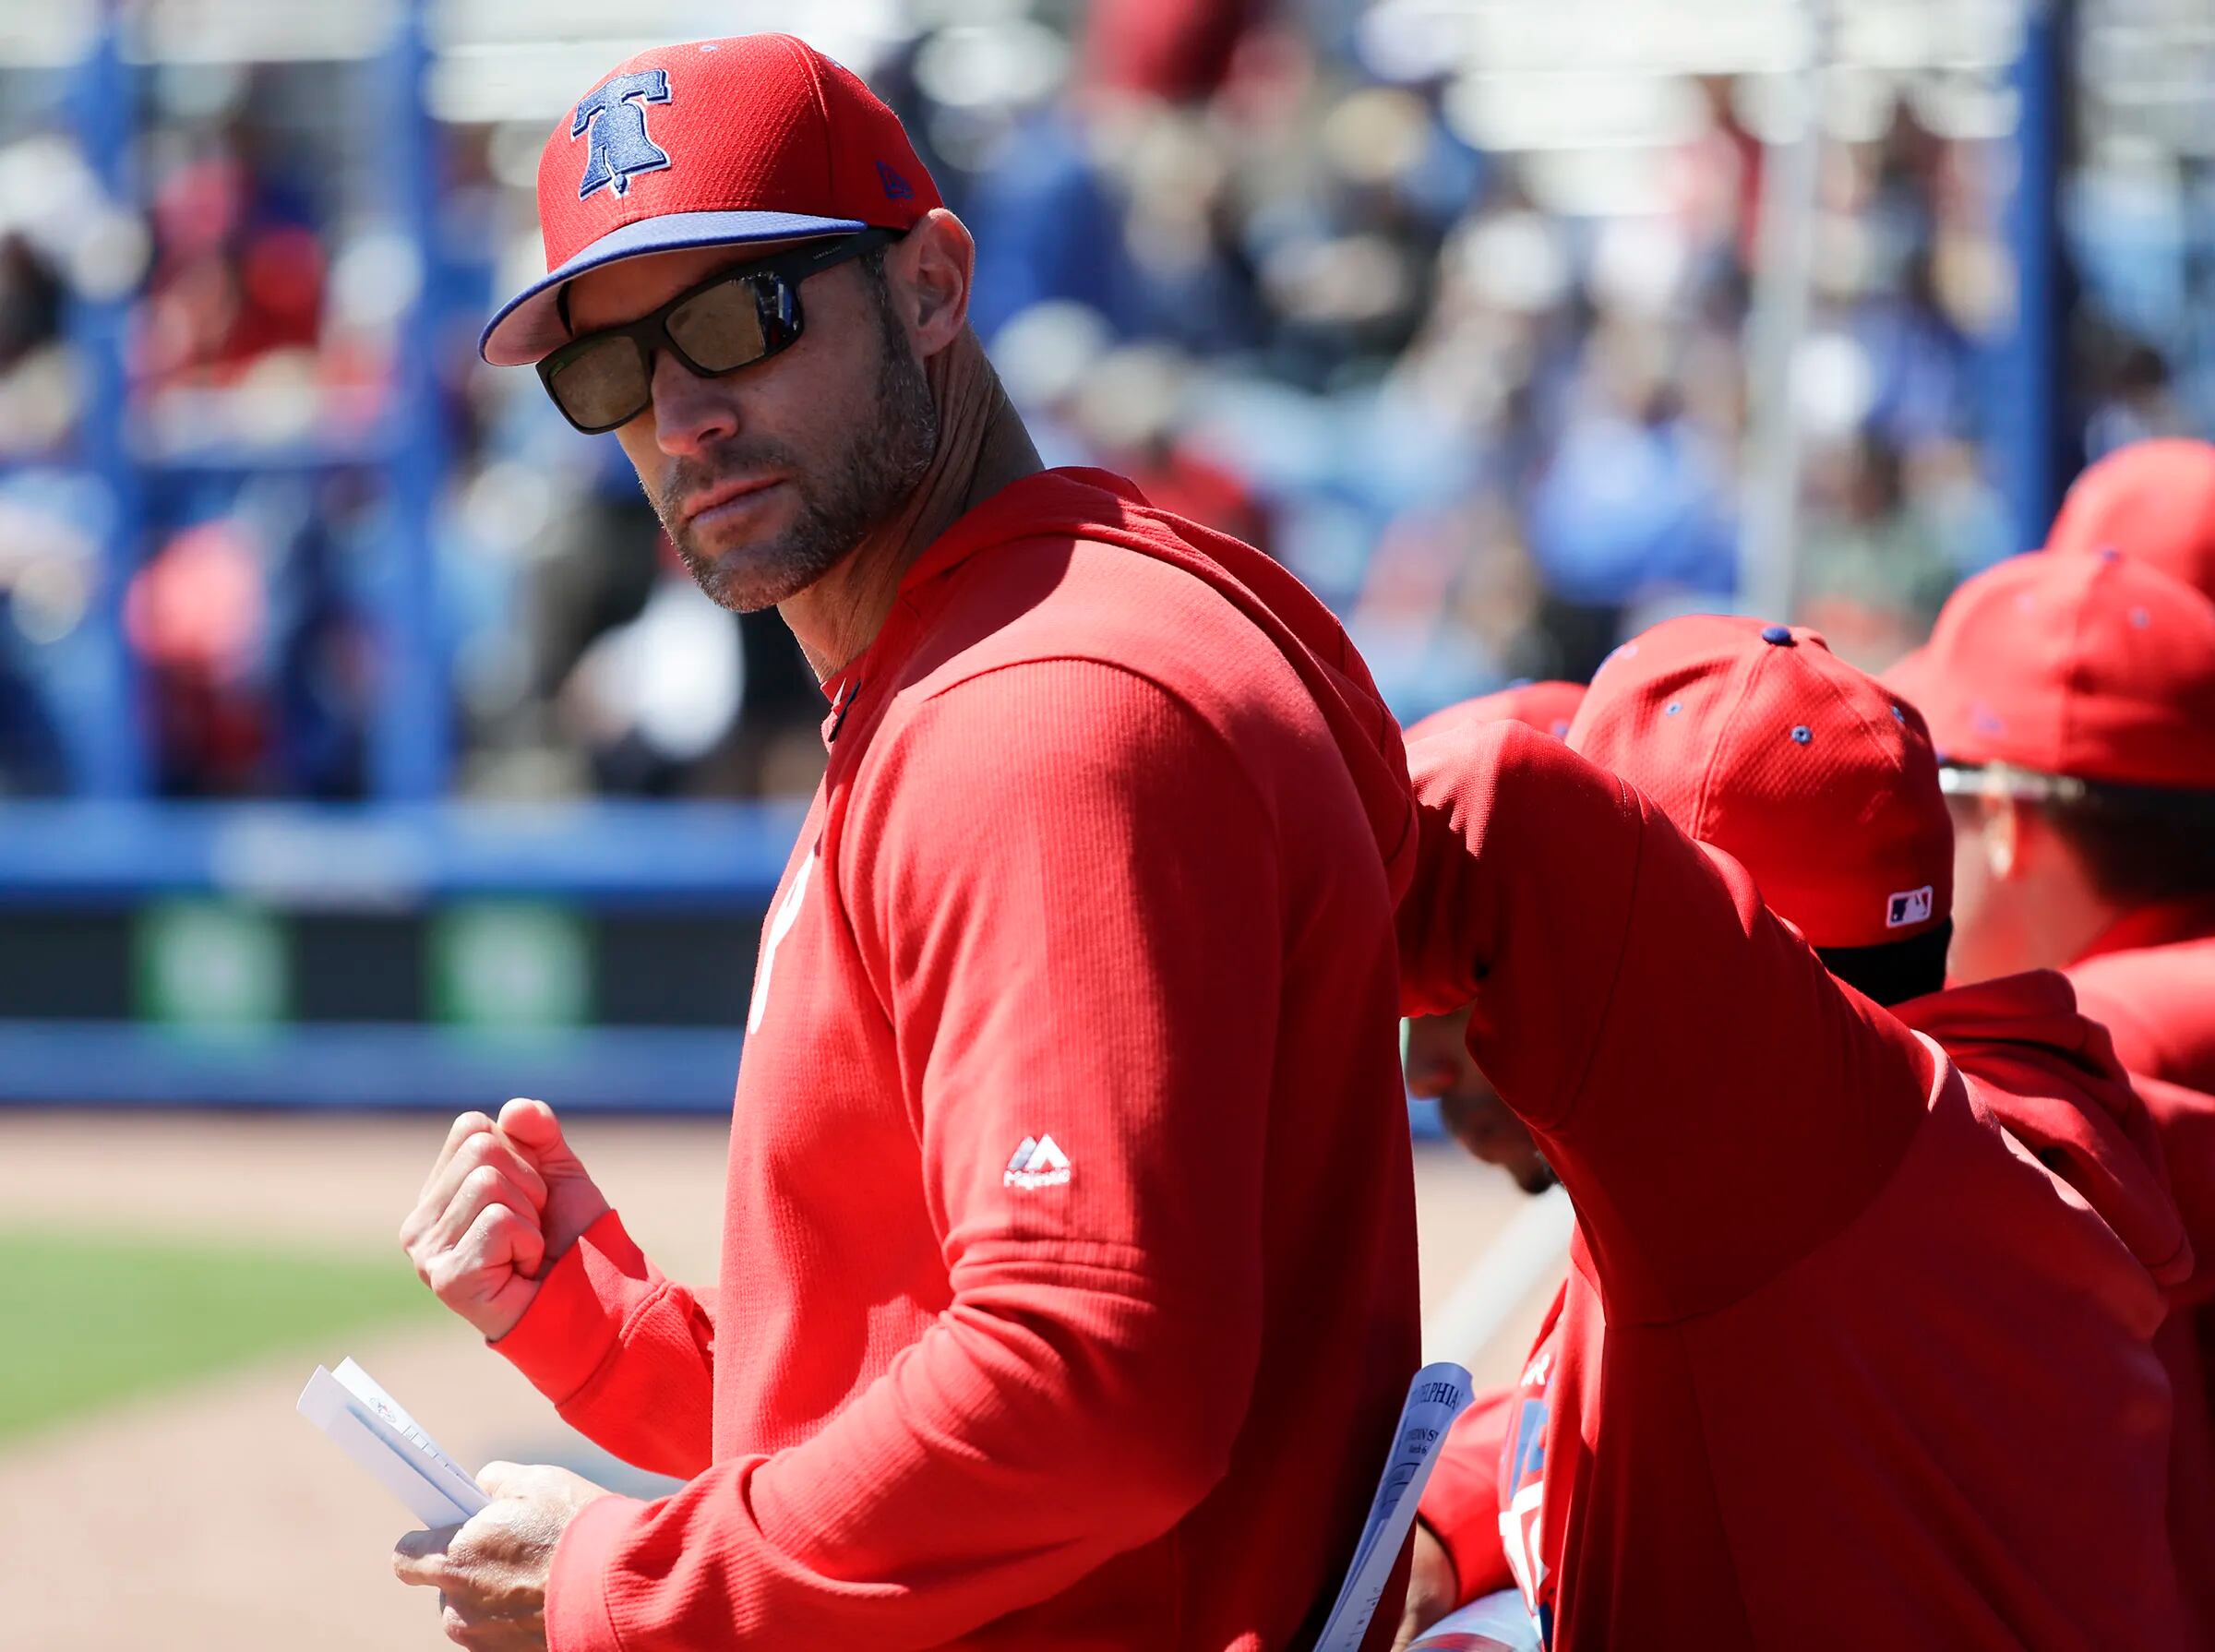 Gabe Kapler isn't worried 'at all' about Bryce Harper's recent struggles   Phillies Nation - Your source for Philadelphia Phillies news, opinion,  history, rumors, events, and other fun stuff.